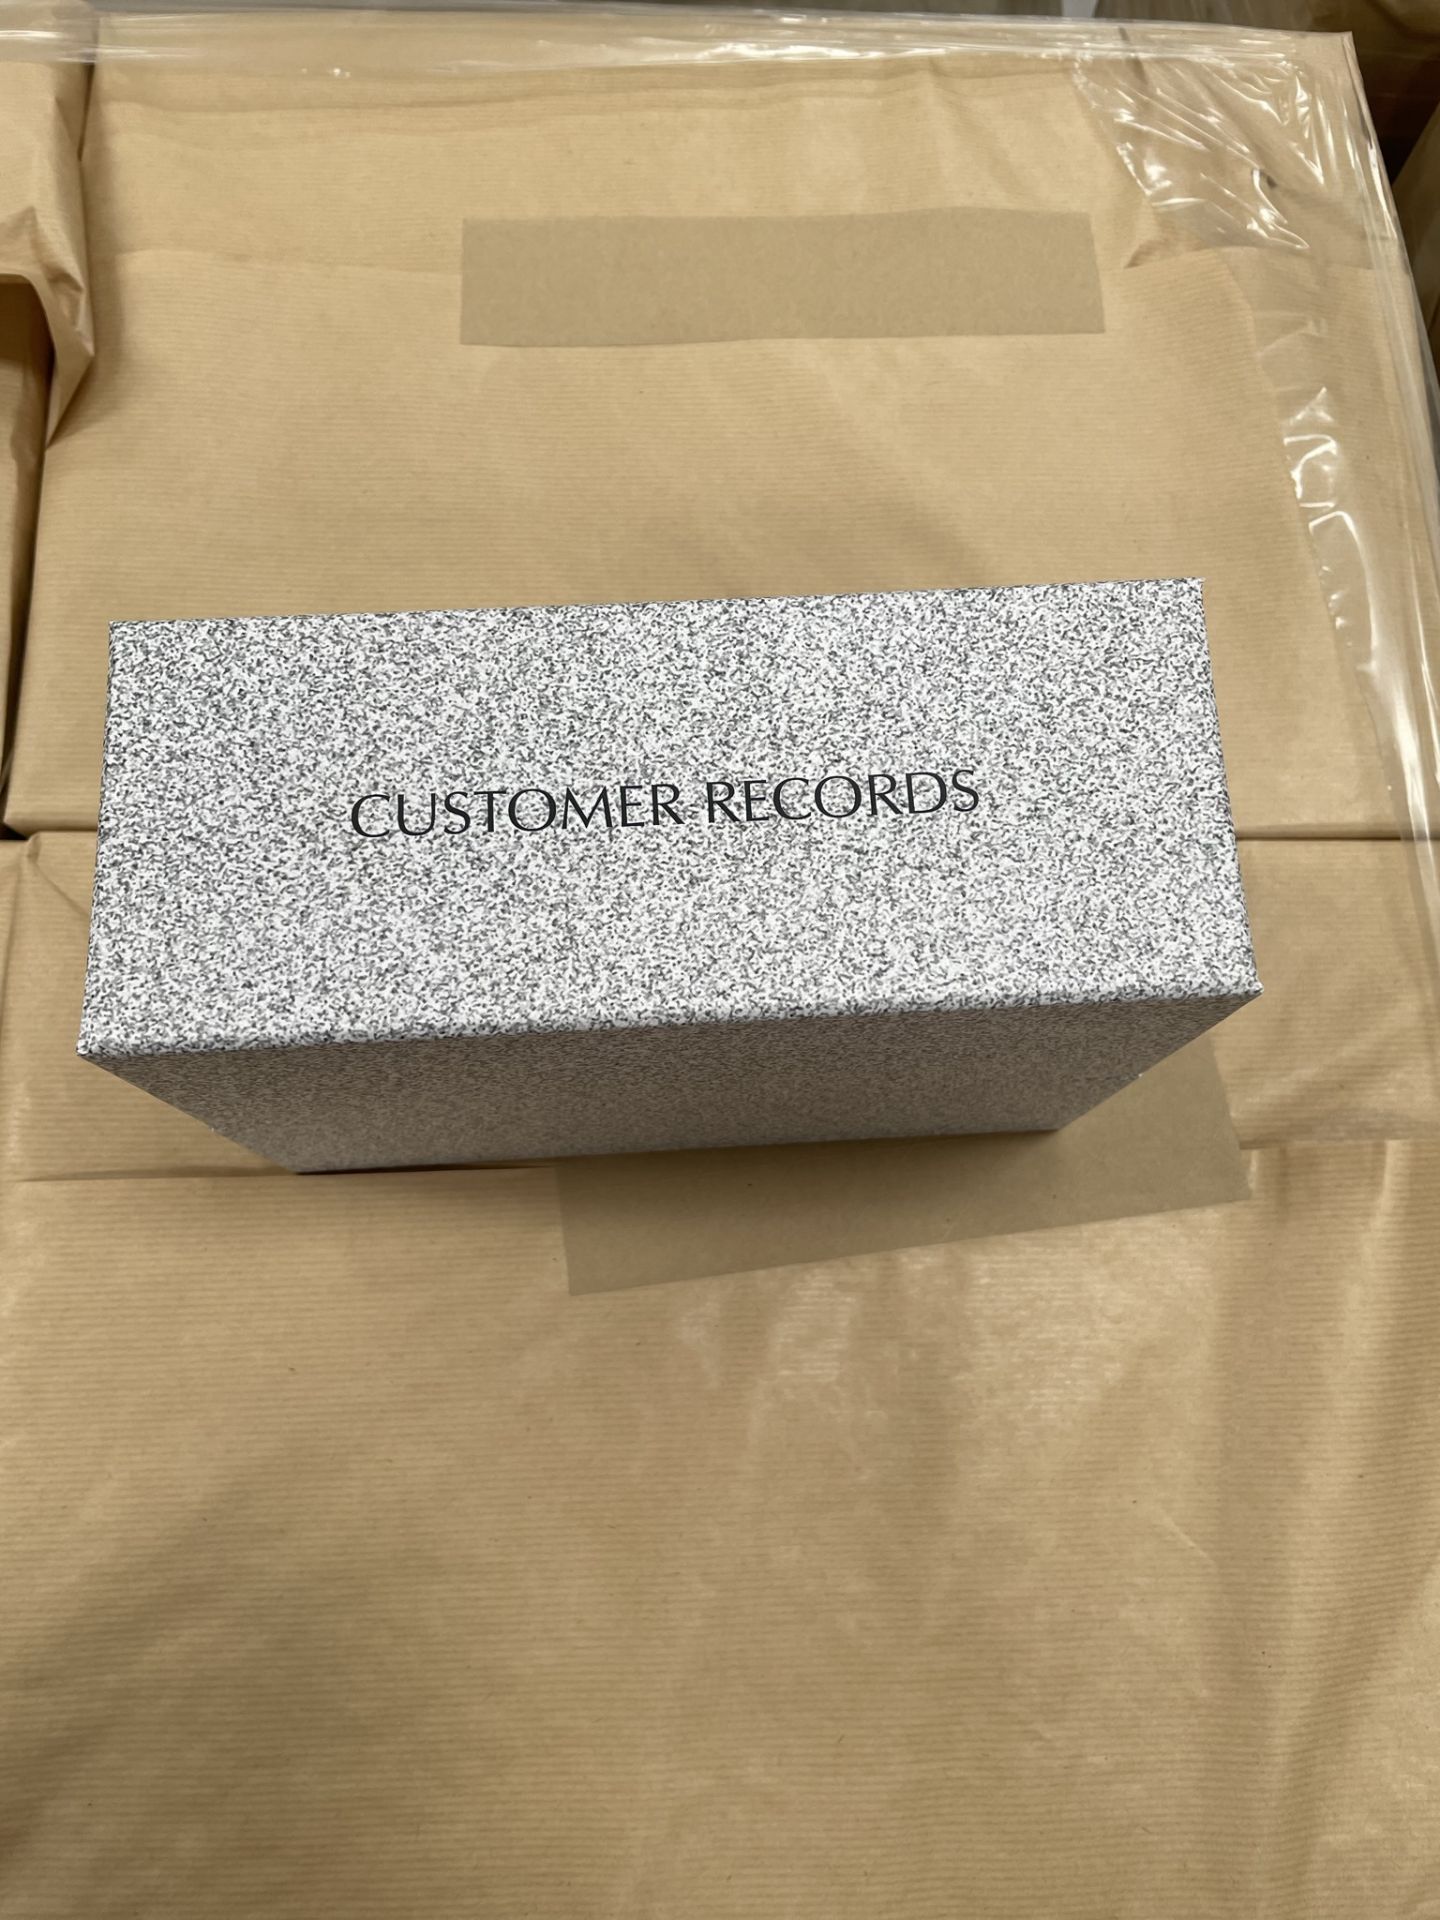 Approximately 200 x Quirepale Customer Record Boxes in Grey - Image 3 of 6